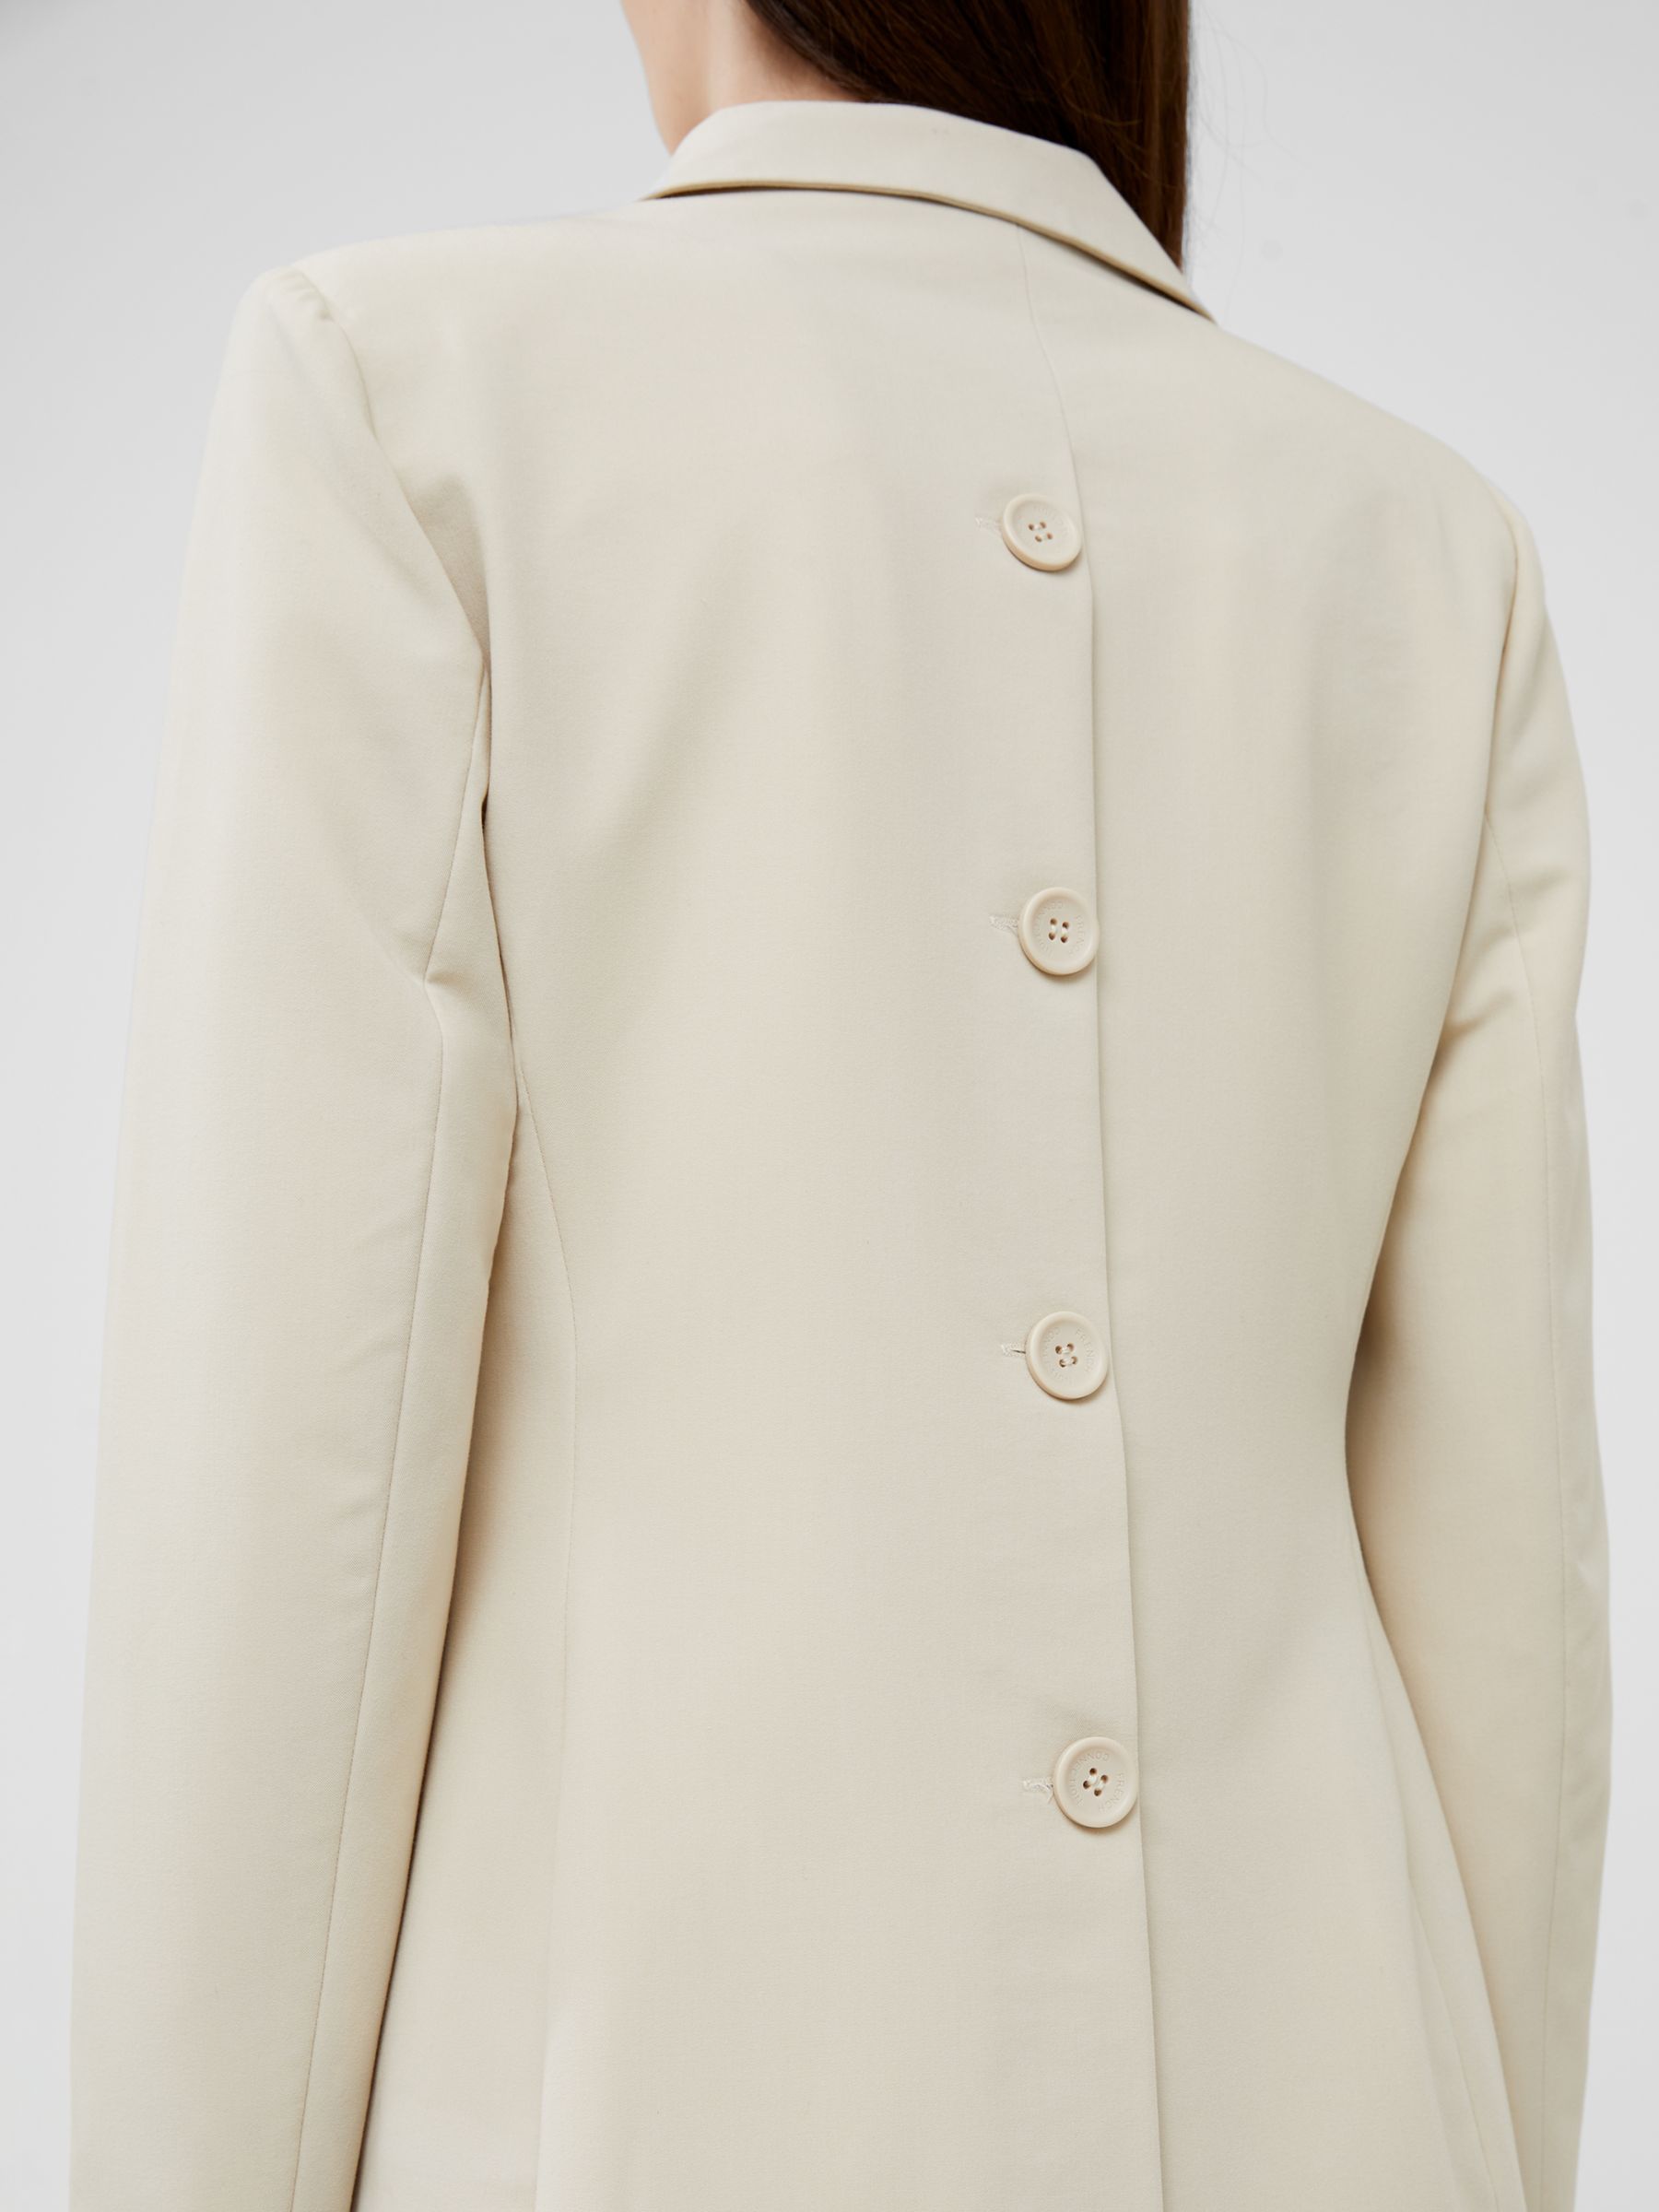 Buy French Connection Everly Suit Blazer, Oyster Gray Online at johnlewis.com